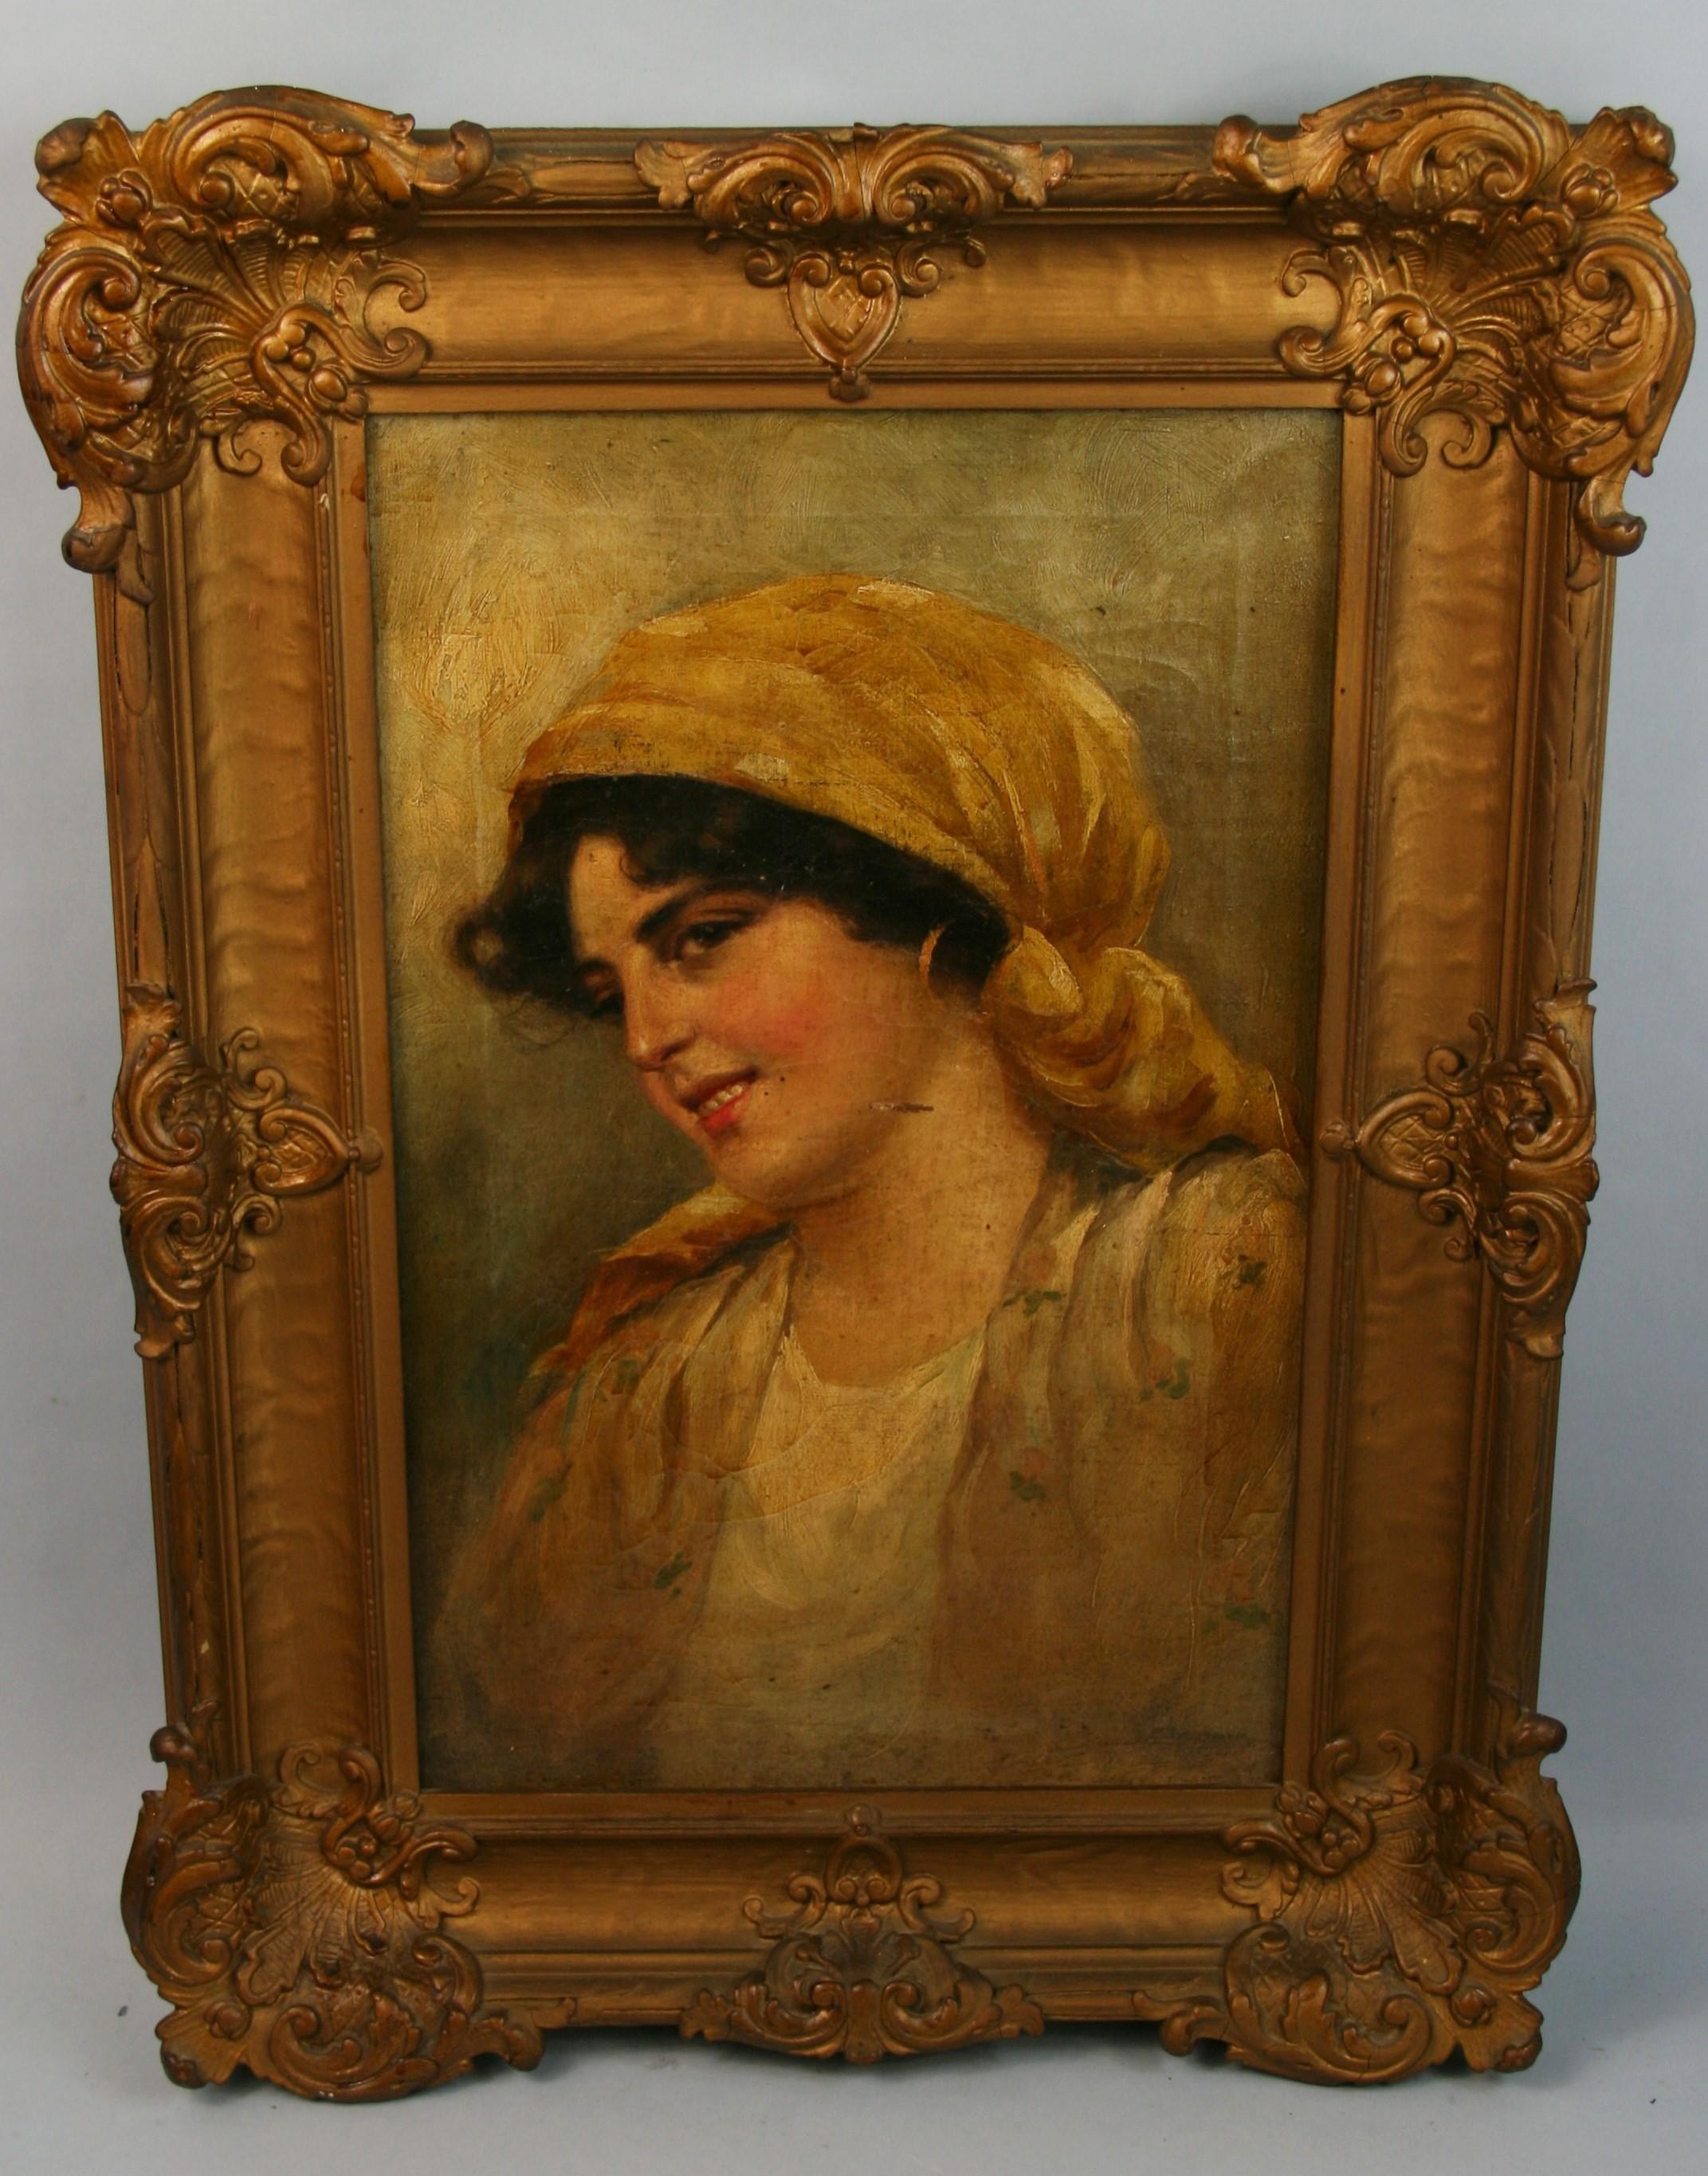 3933 Antique oil on canvas in an ornate period frame
Image size 16.5x11